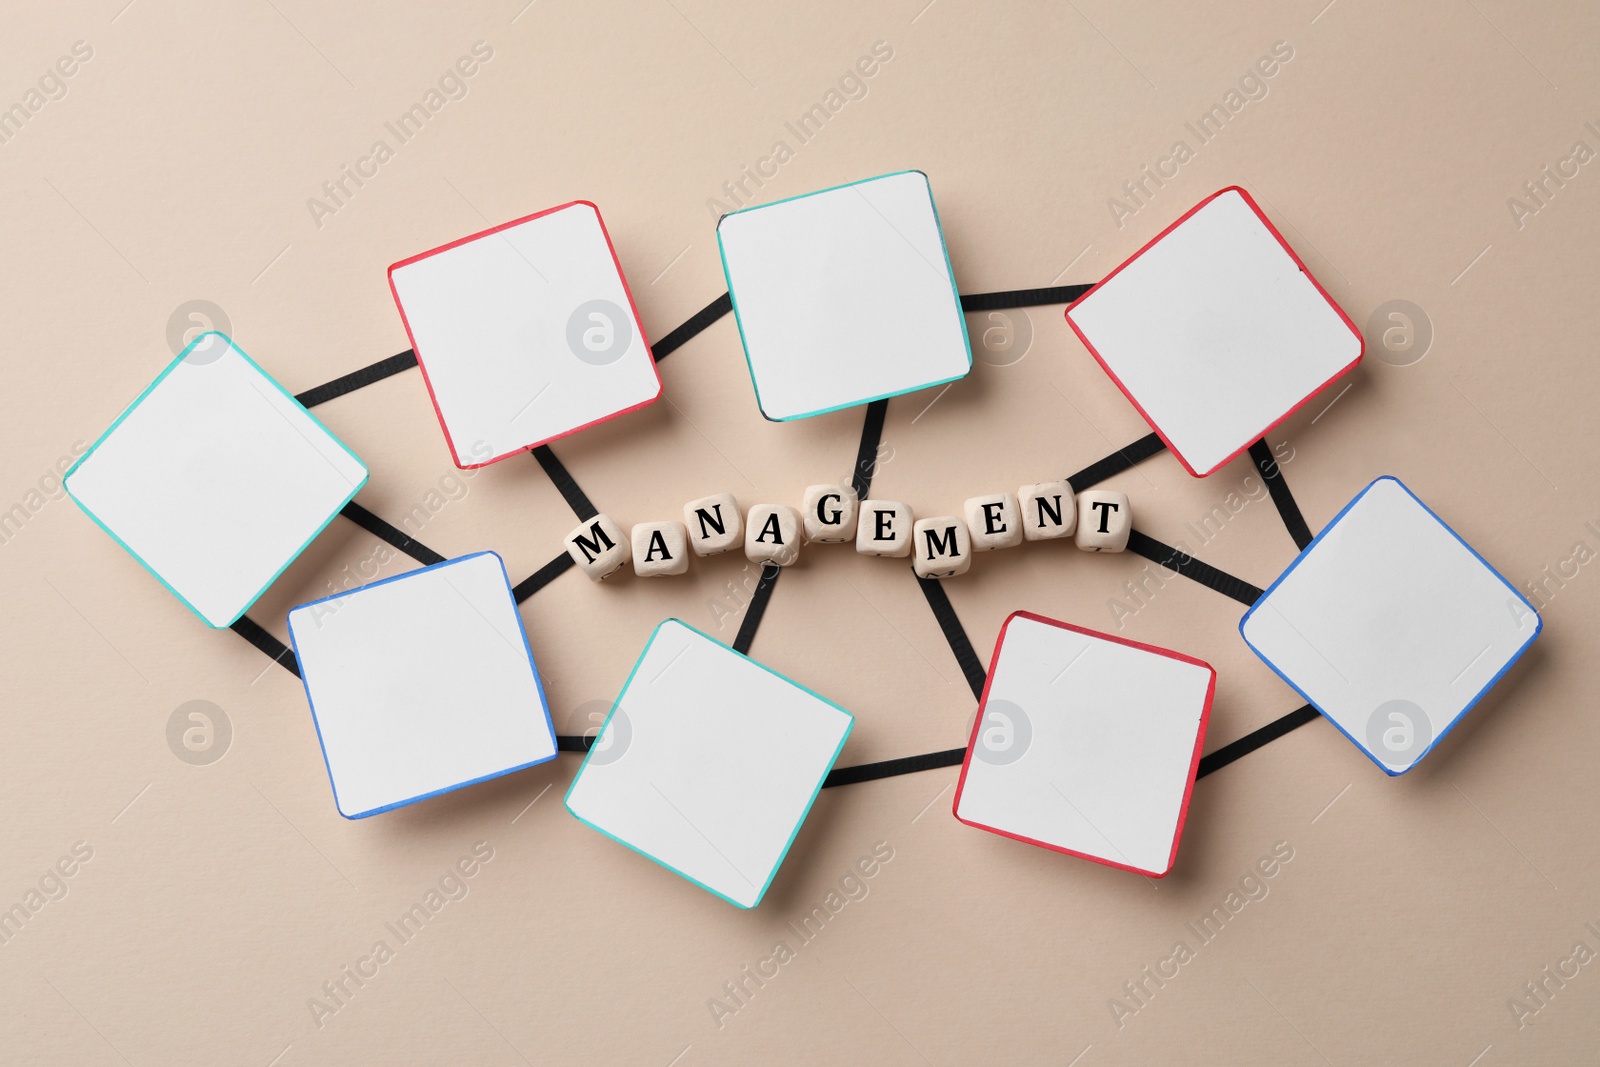 Photo of Scheme with word Management of wooden cubes and paper cards on beige background, top view